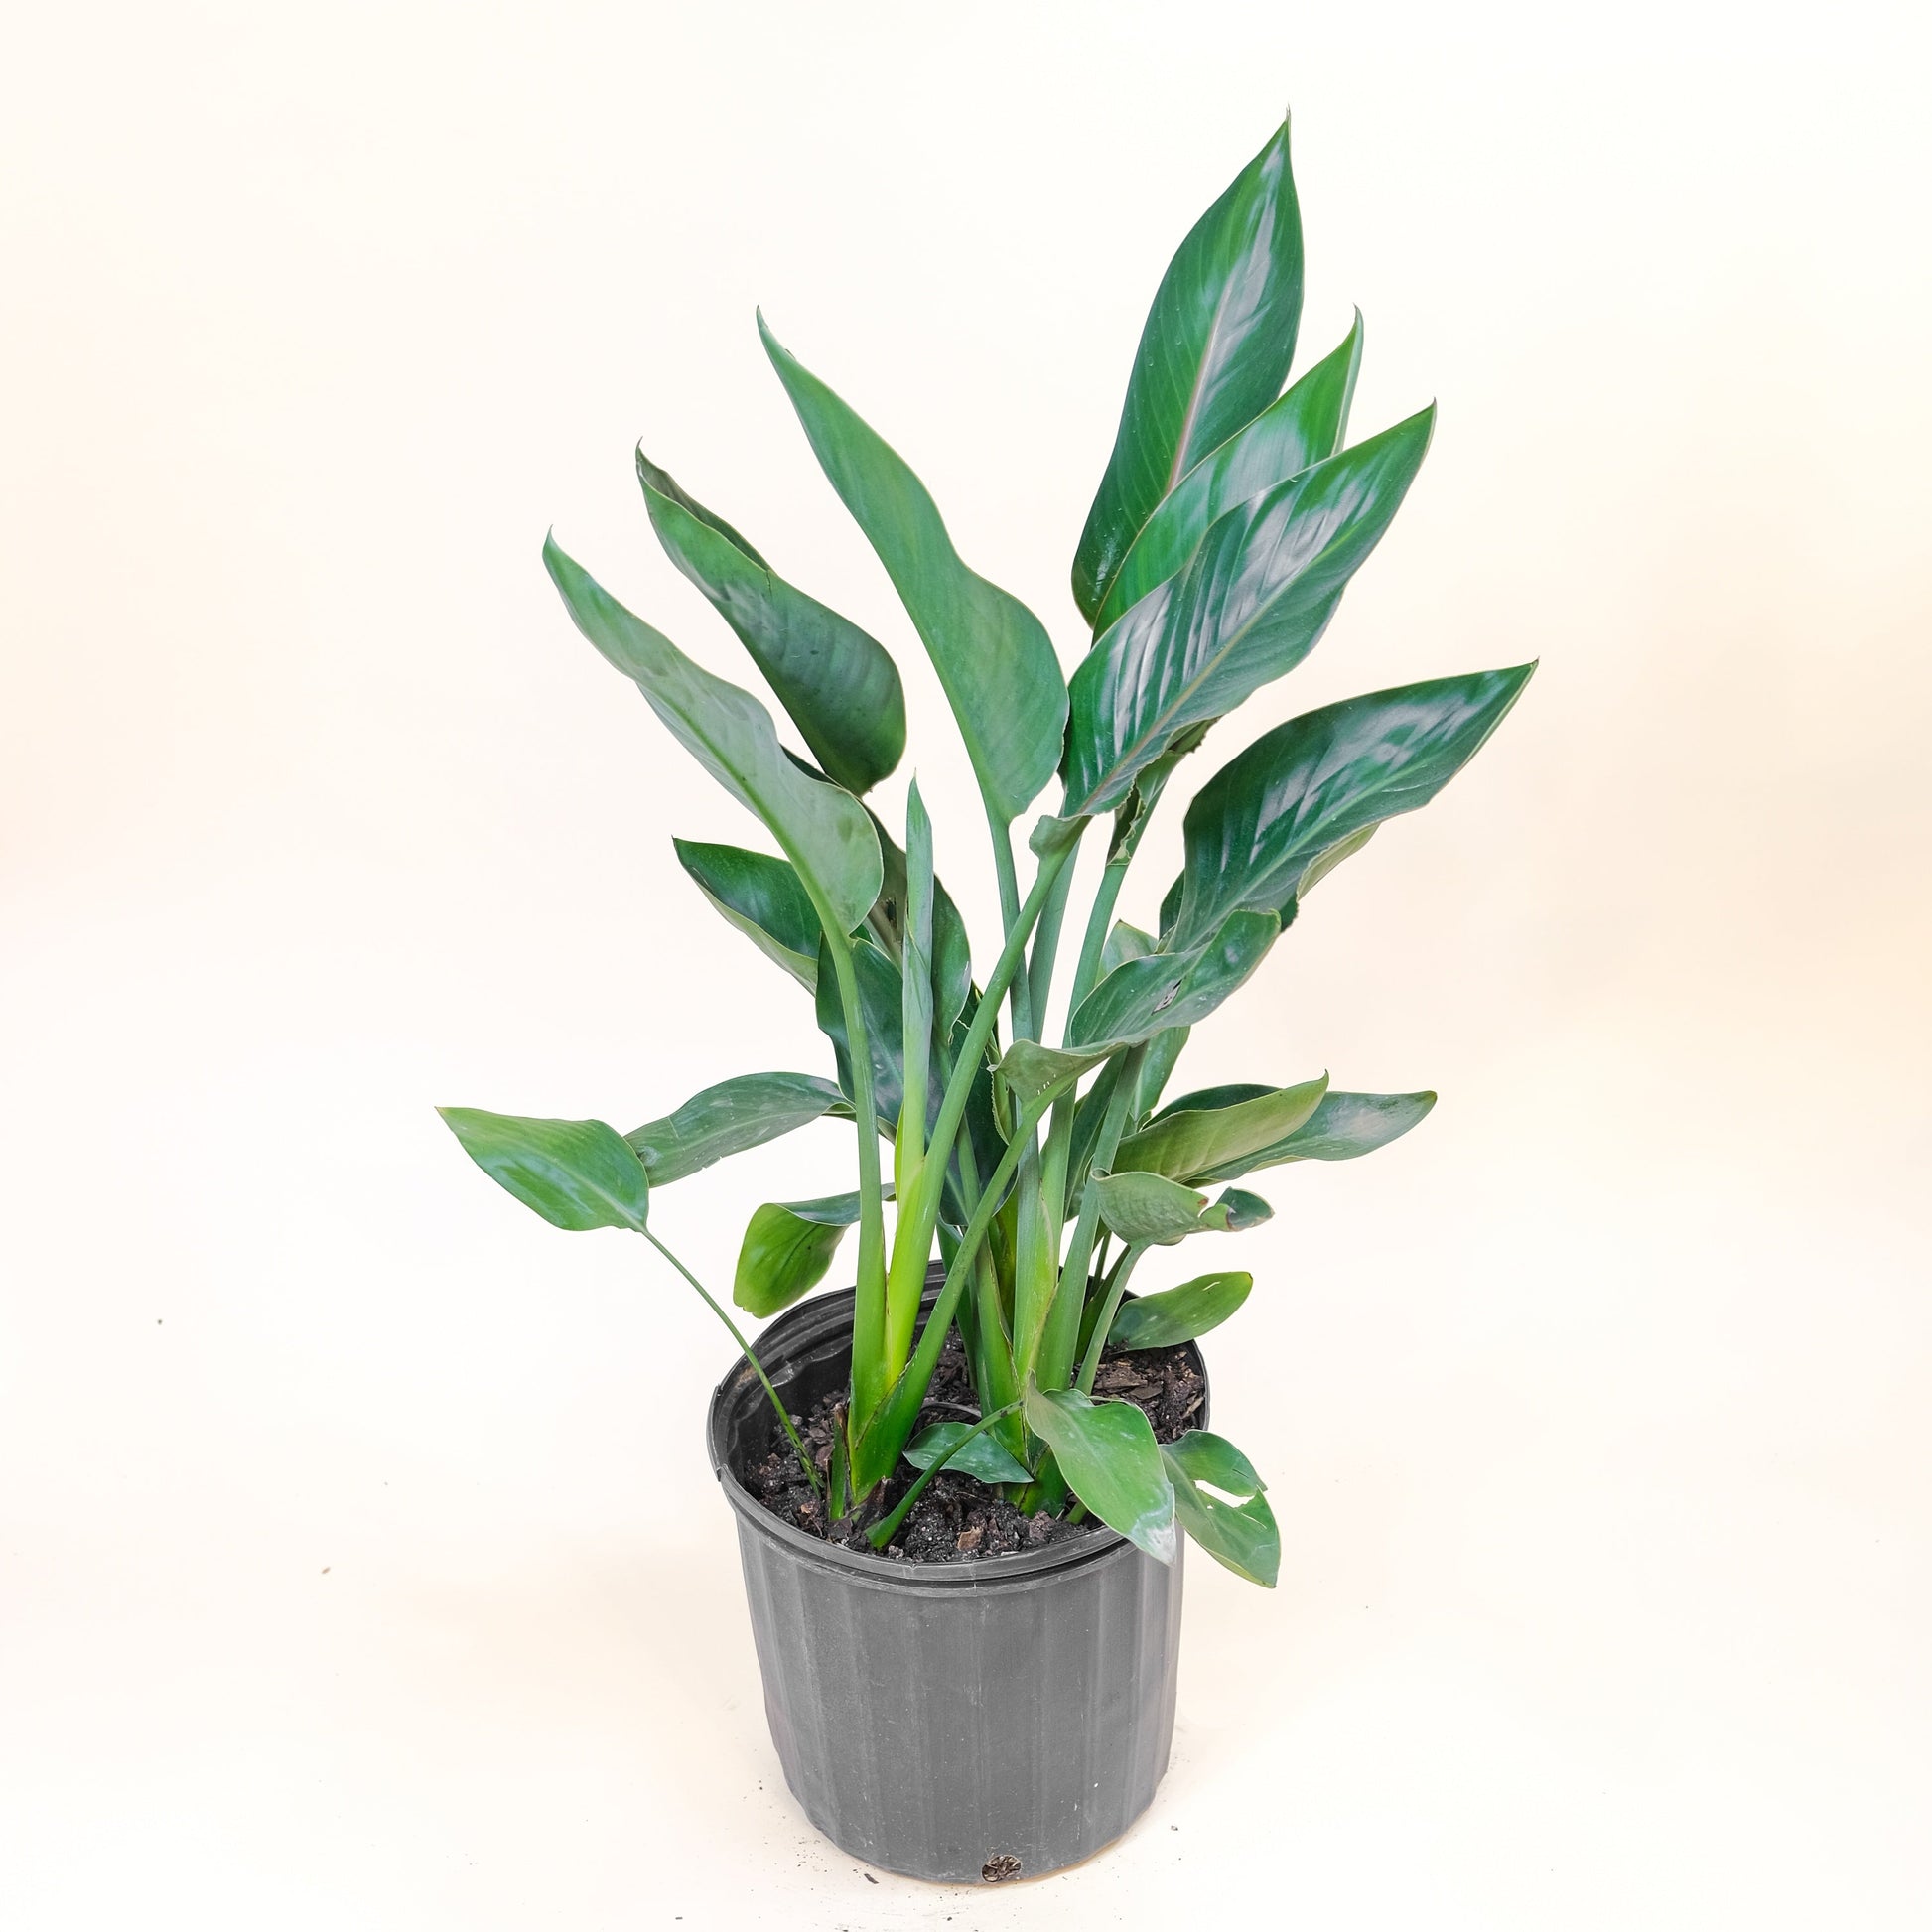 Orange Bird of Paradise, Banana Leaf Plant, Banana Tree (Strelitzia reginae) in a 10 inch pot. Indoor plant for sale by Promise Supply for delivery and pickup in Toronto